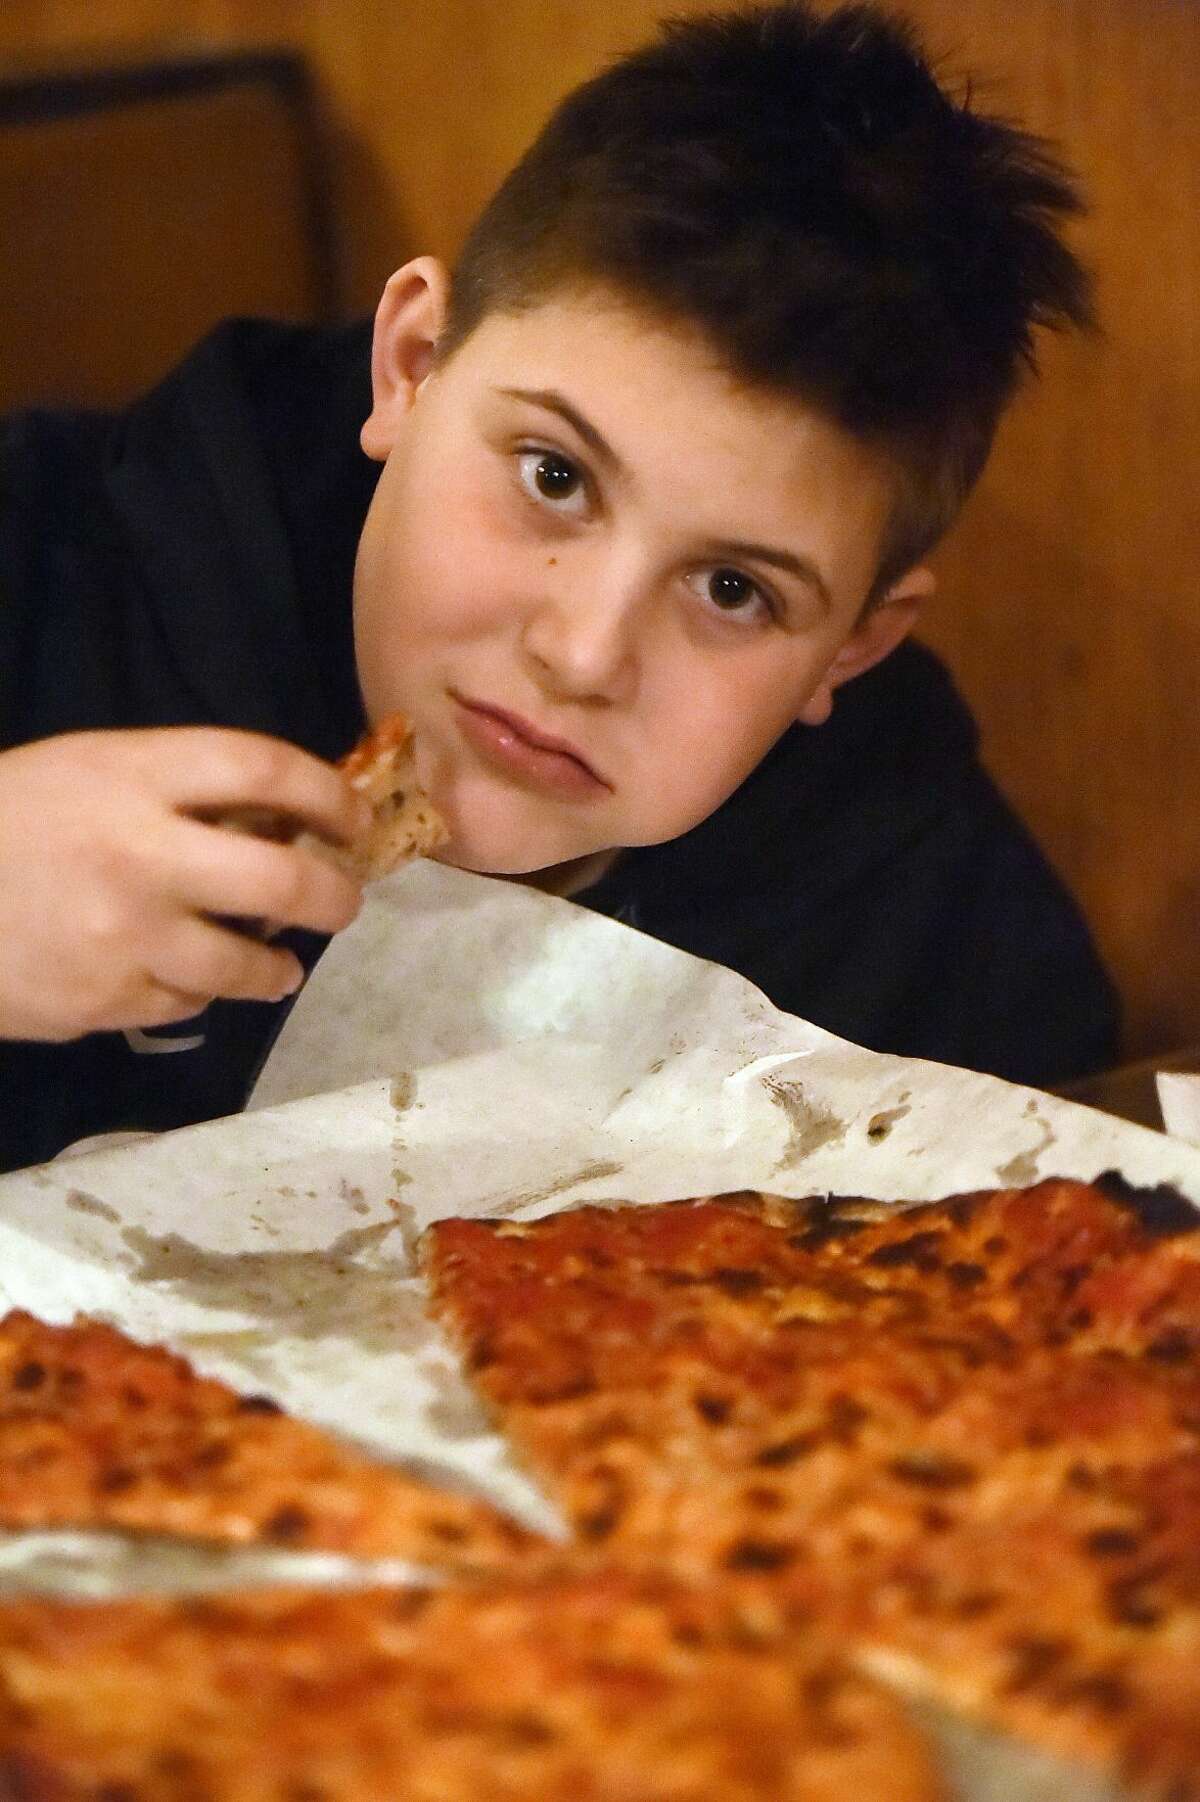 Sally's Apizza, the iconic pizzeria on Wooster Street in New Haven?’s Little Italy neighborhood, established in 1938 by Salvatore Consiglio, Friday, Dec. 29, 2017.